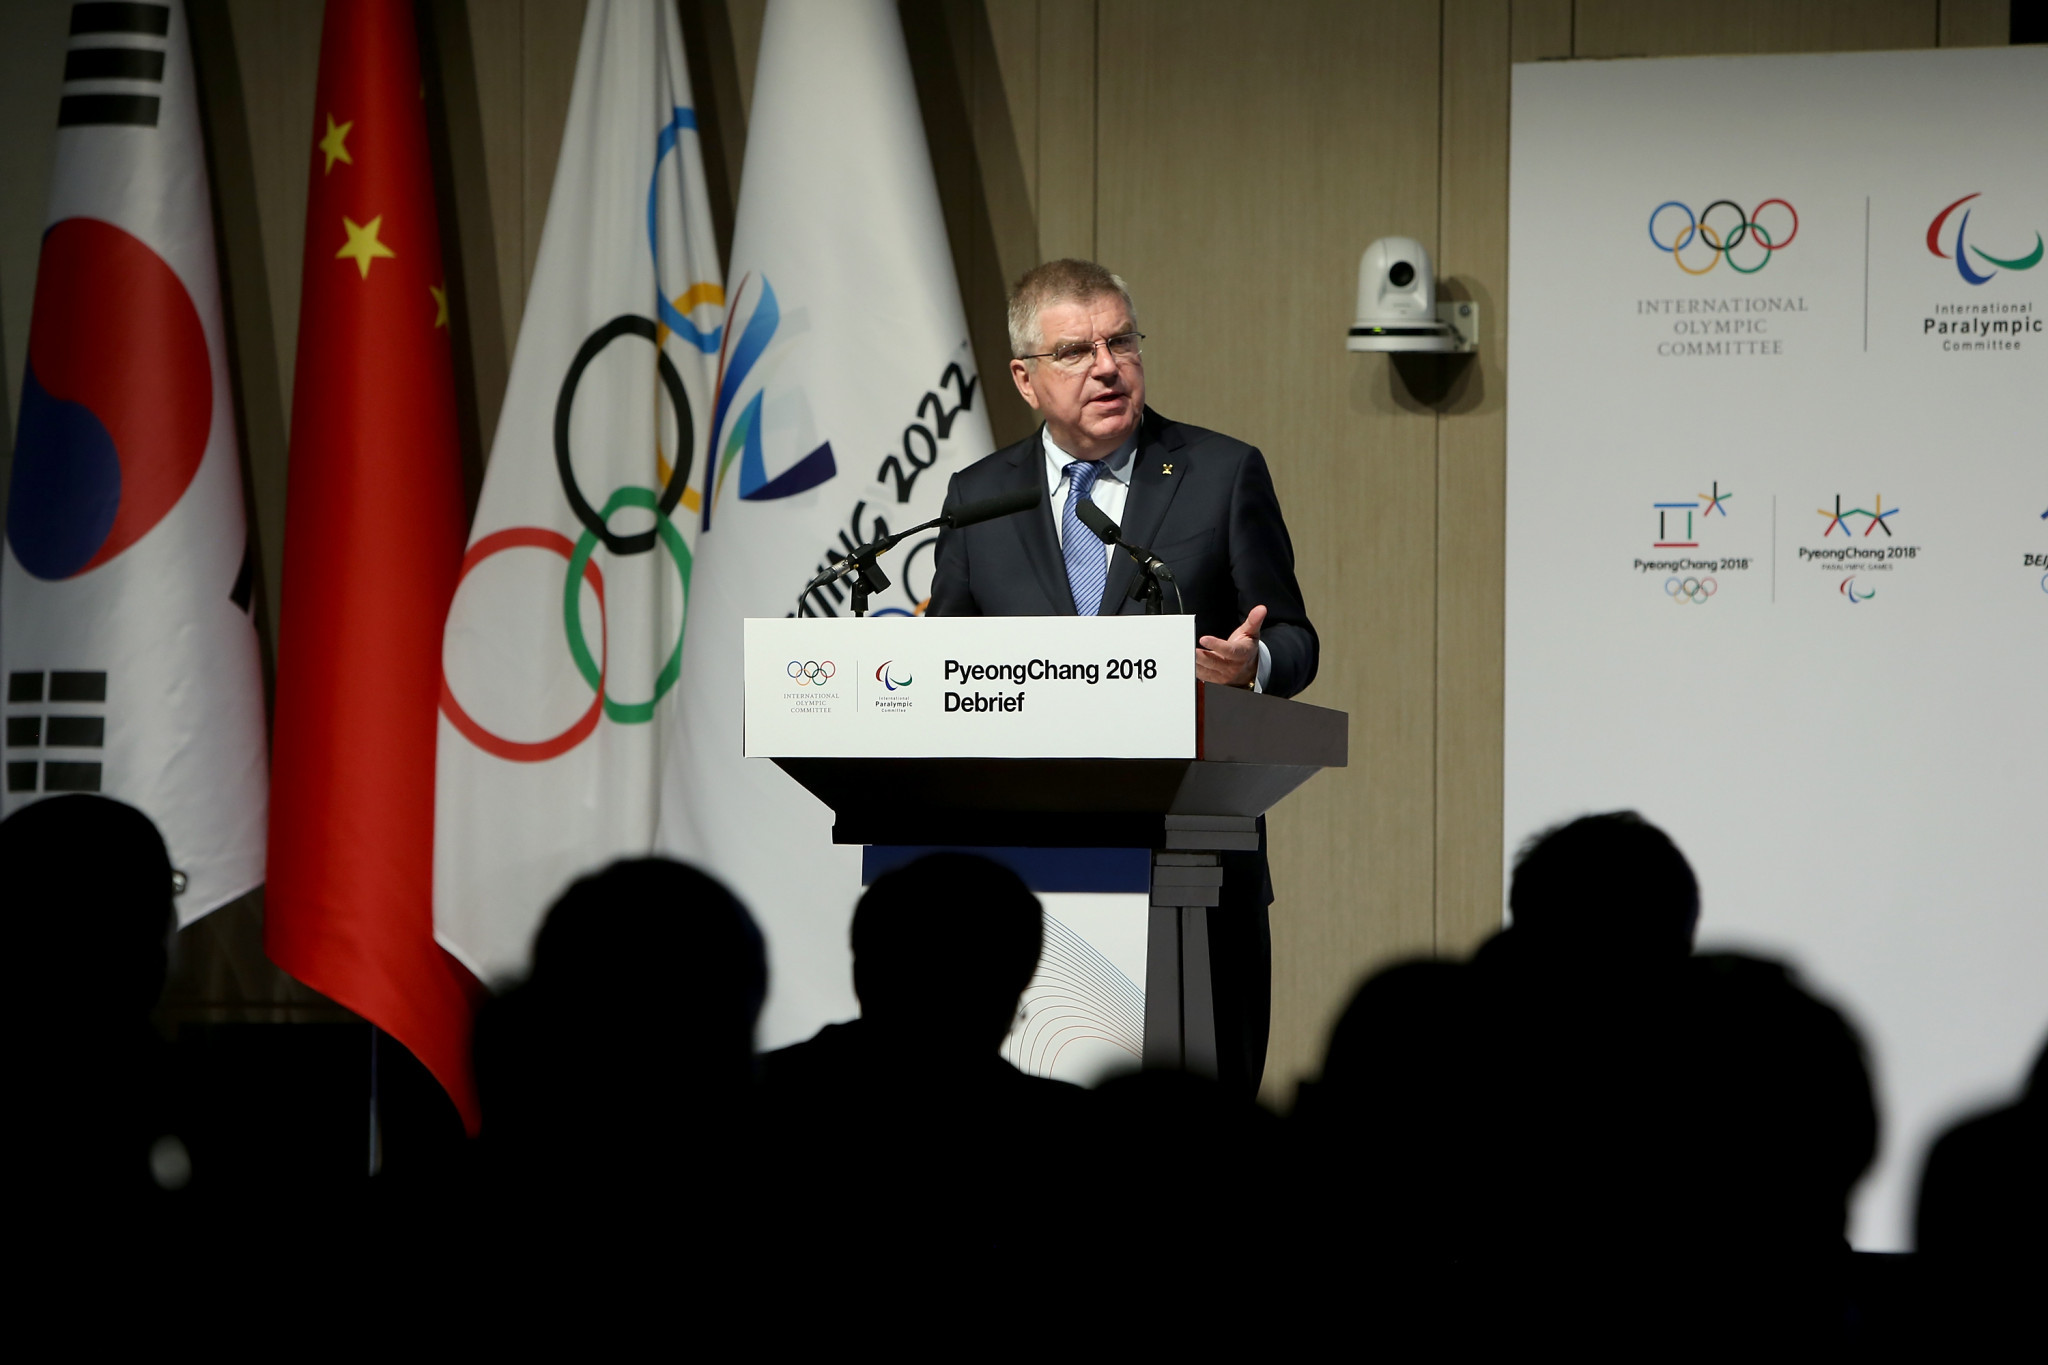 IOC President Thomas Bach was among those present at the Pyeongchang 2018 debrief ©Getty Images